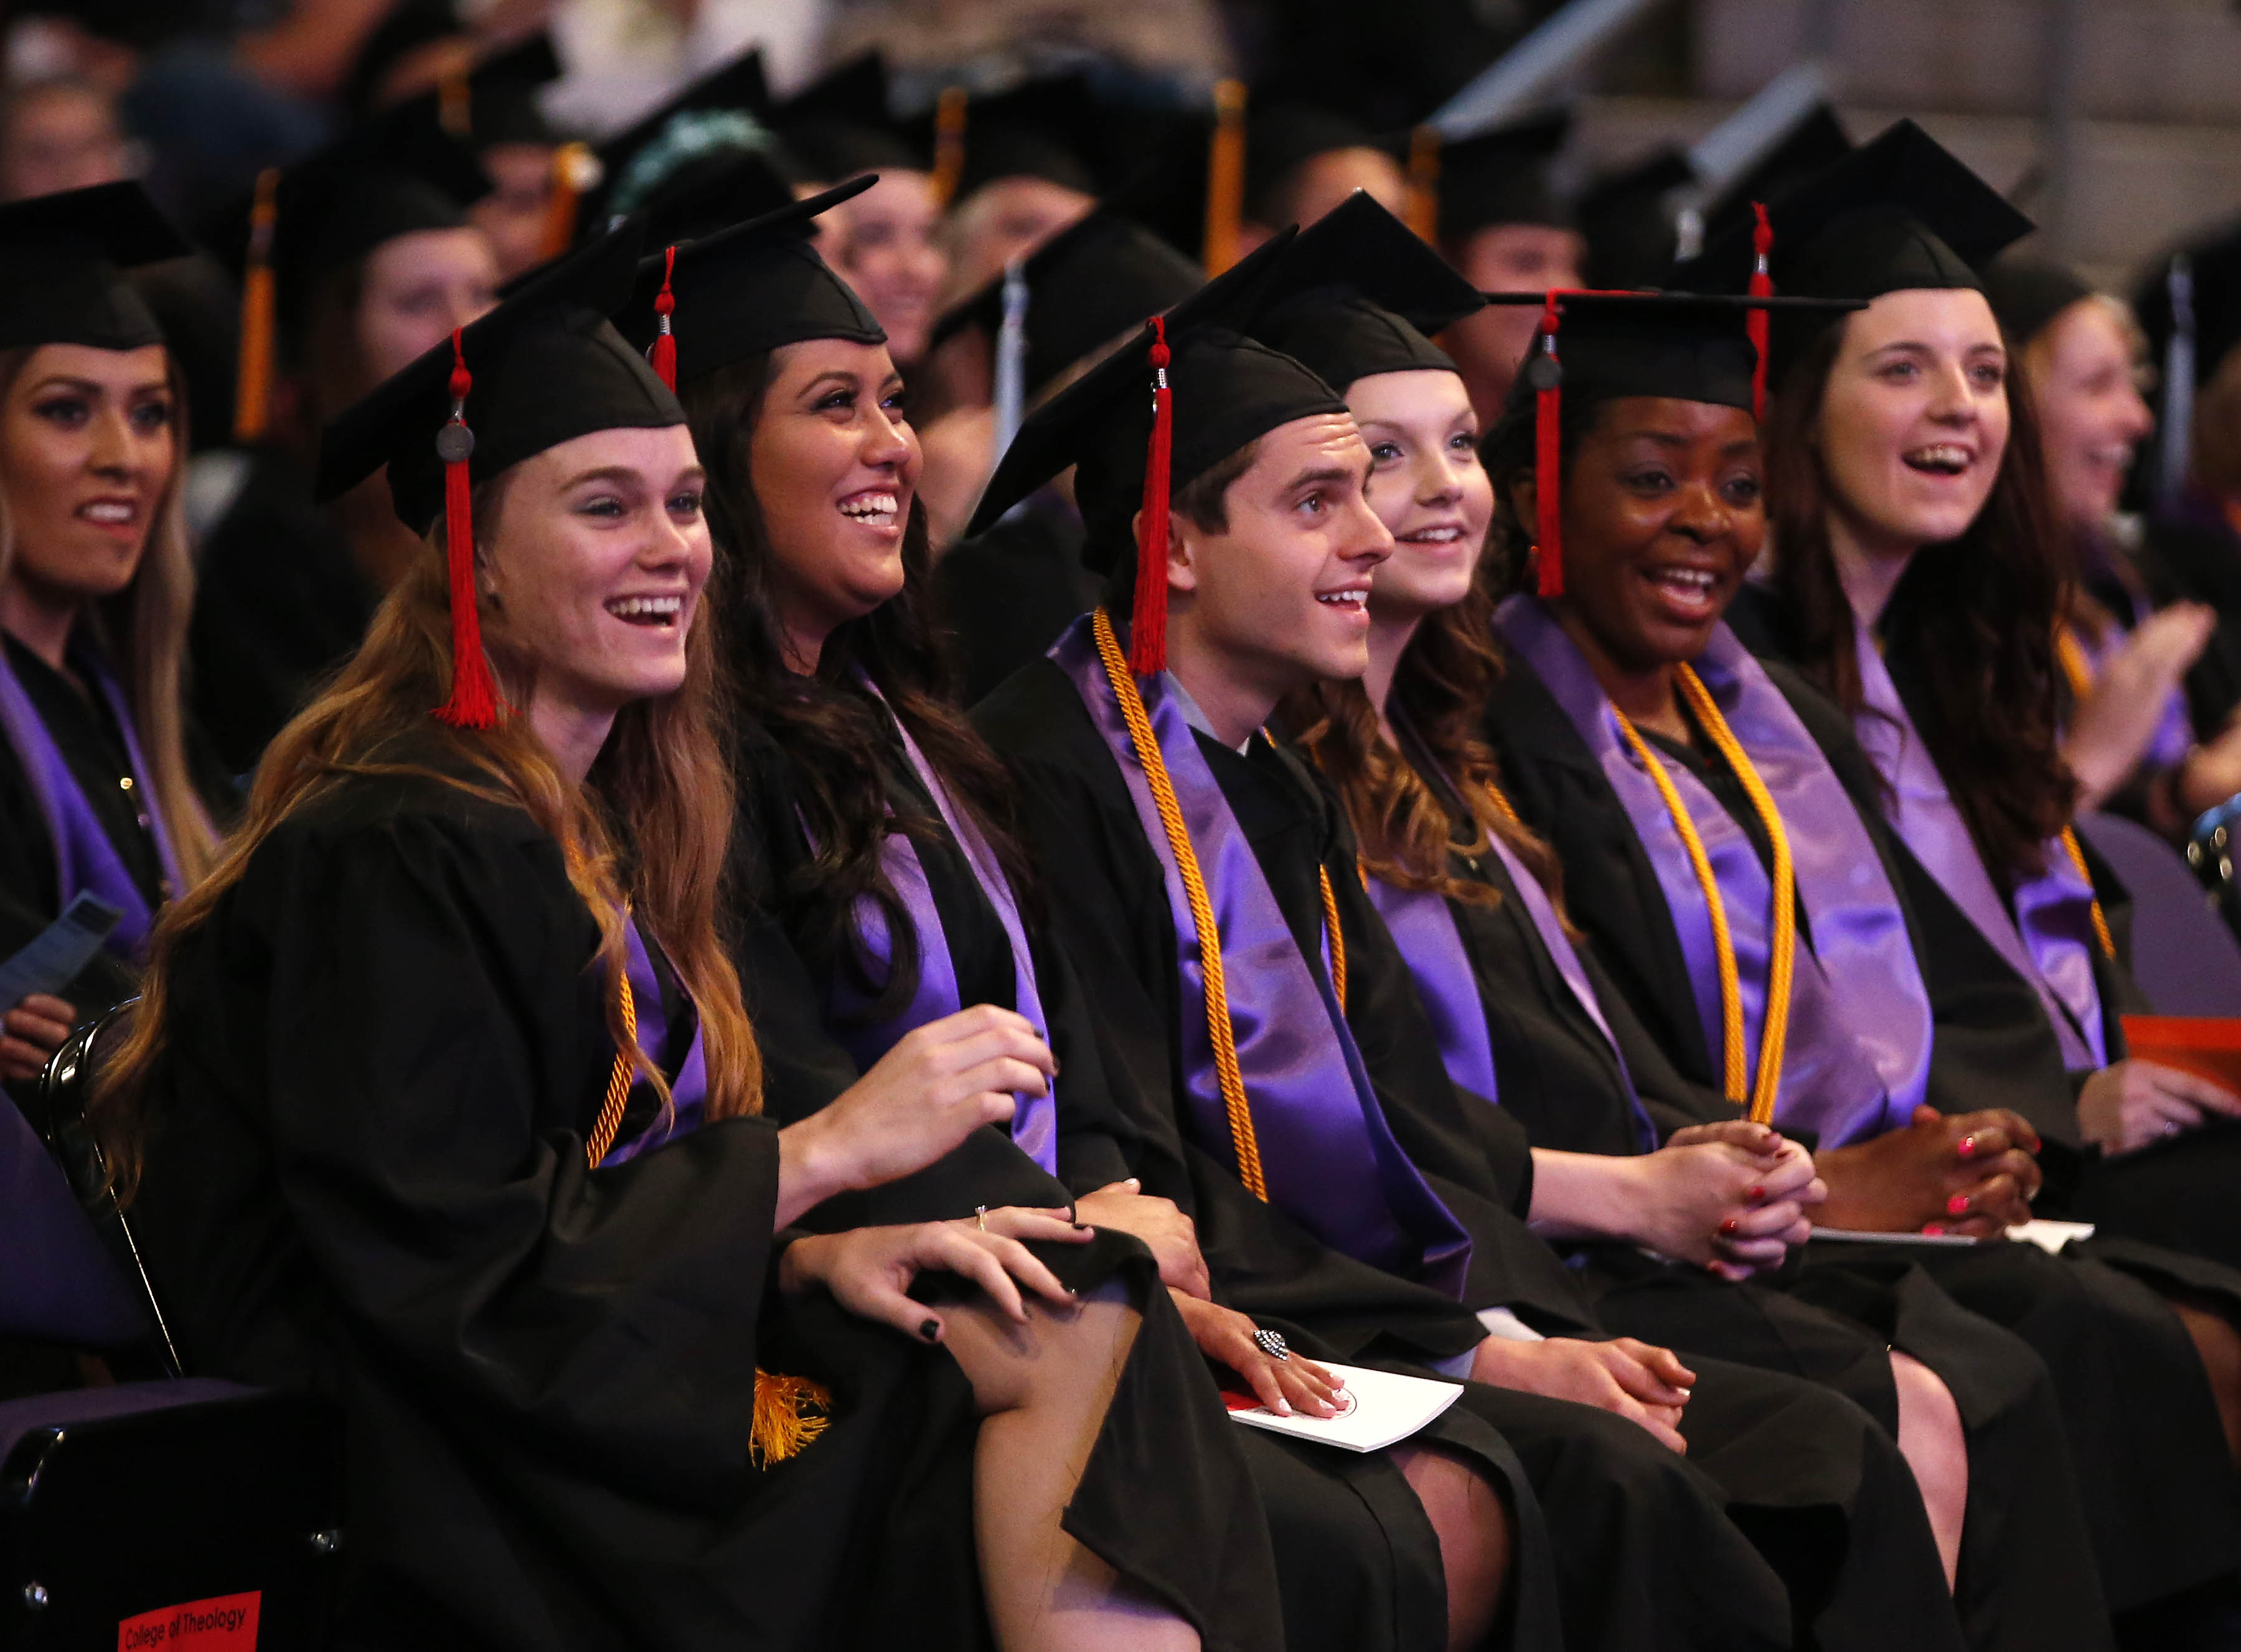 Winter commencement warms the hearts of graduates and guests GCU News